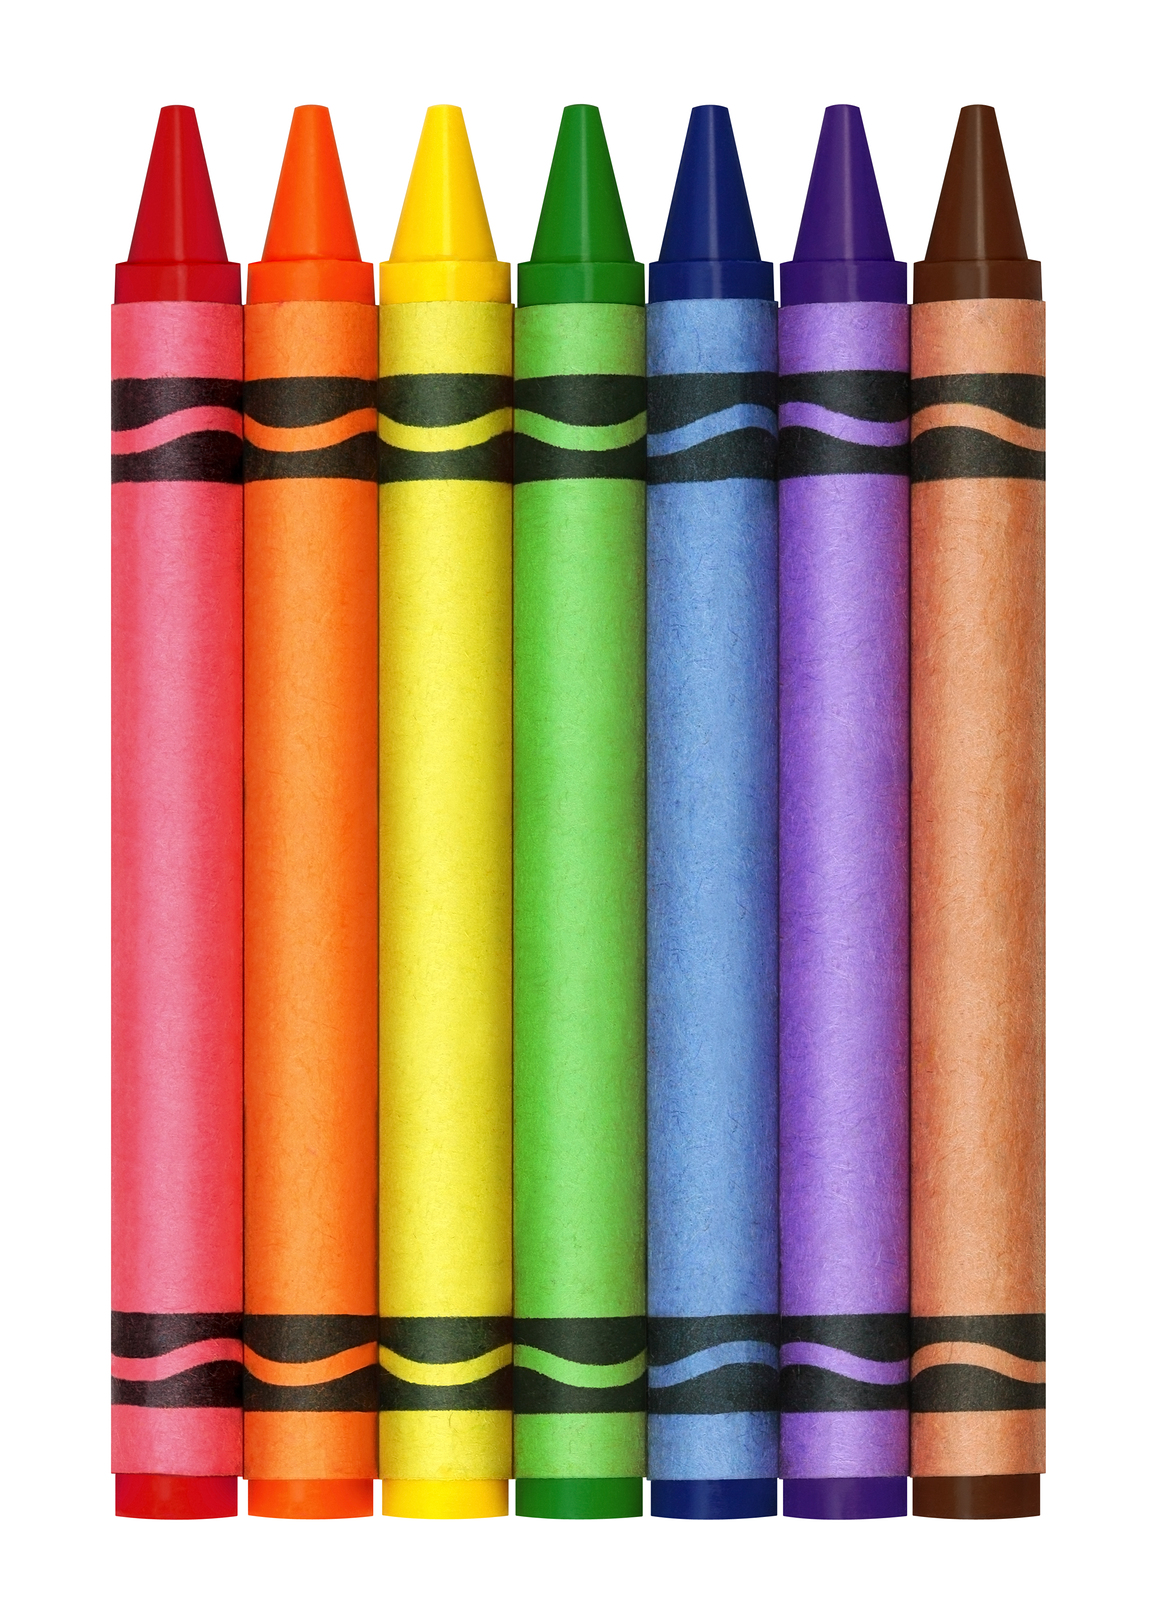 14 Images Of Crayons Free Cliparts That You Can Download To You    